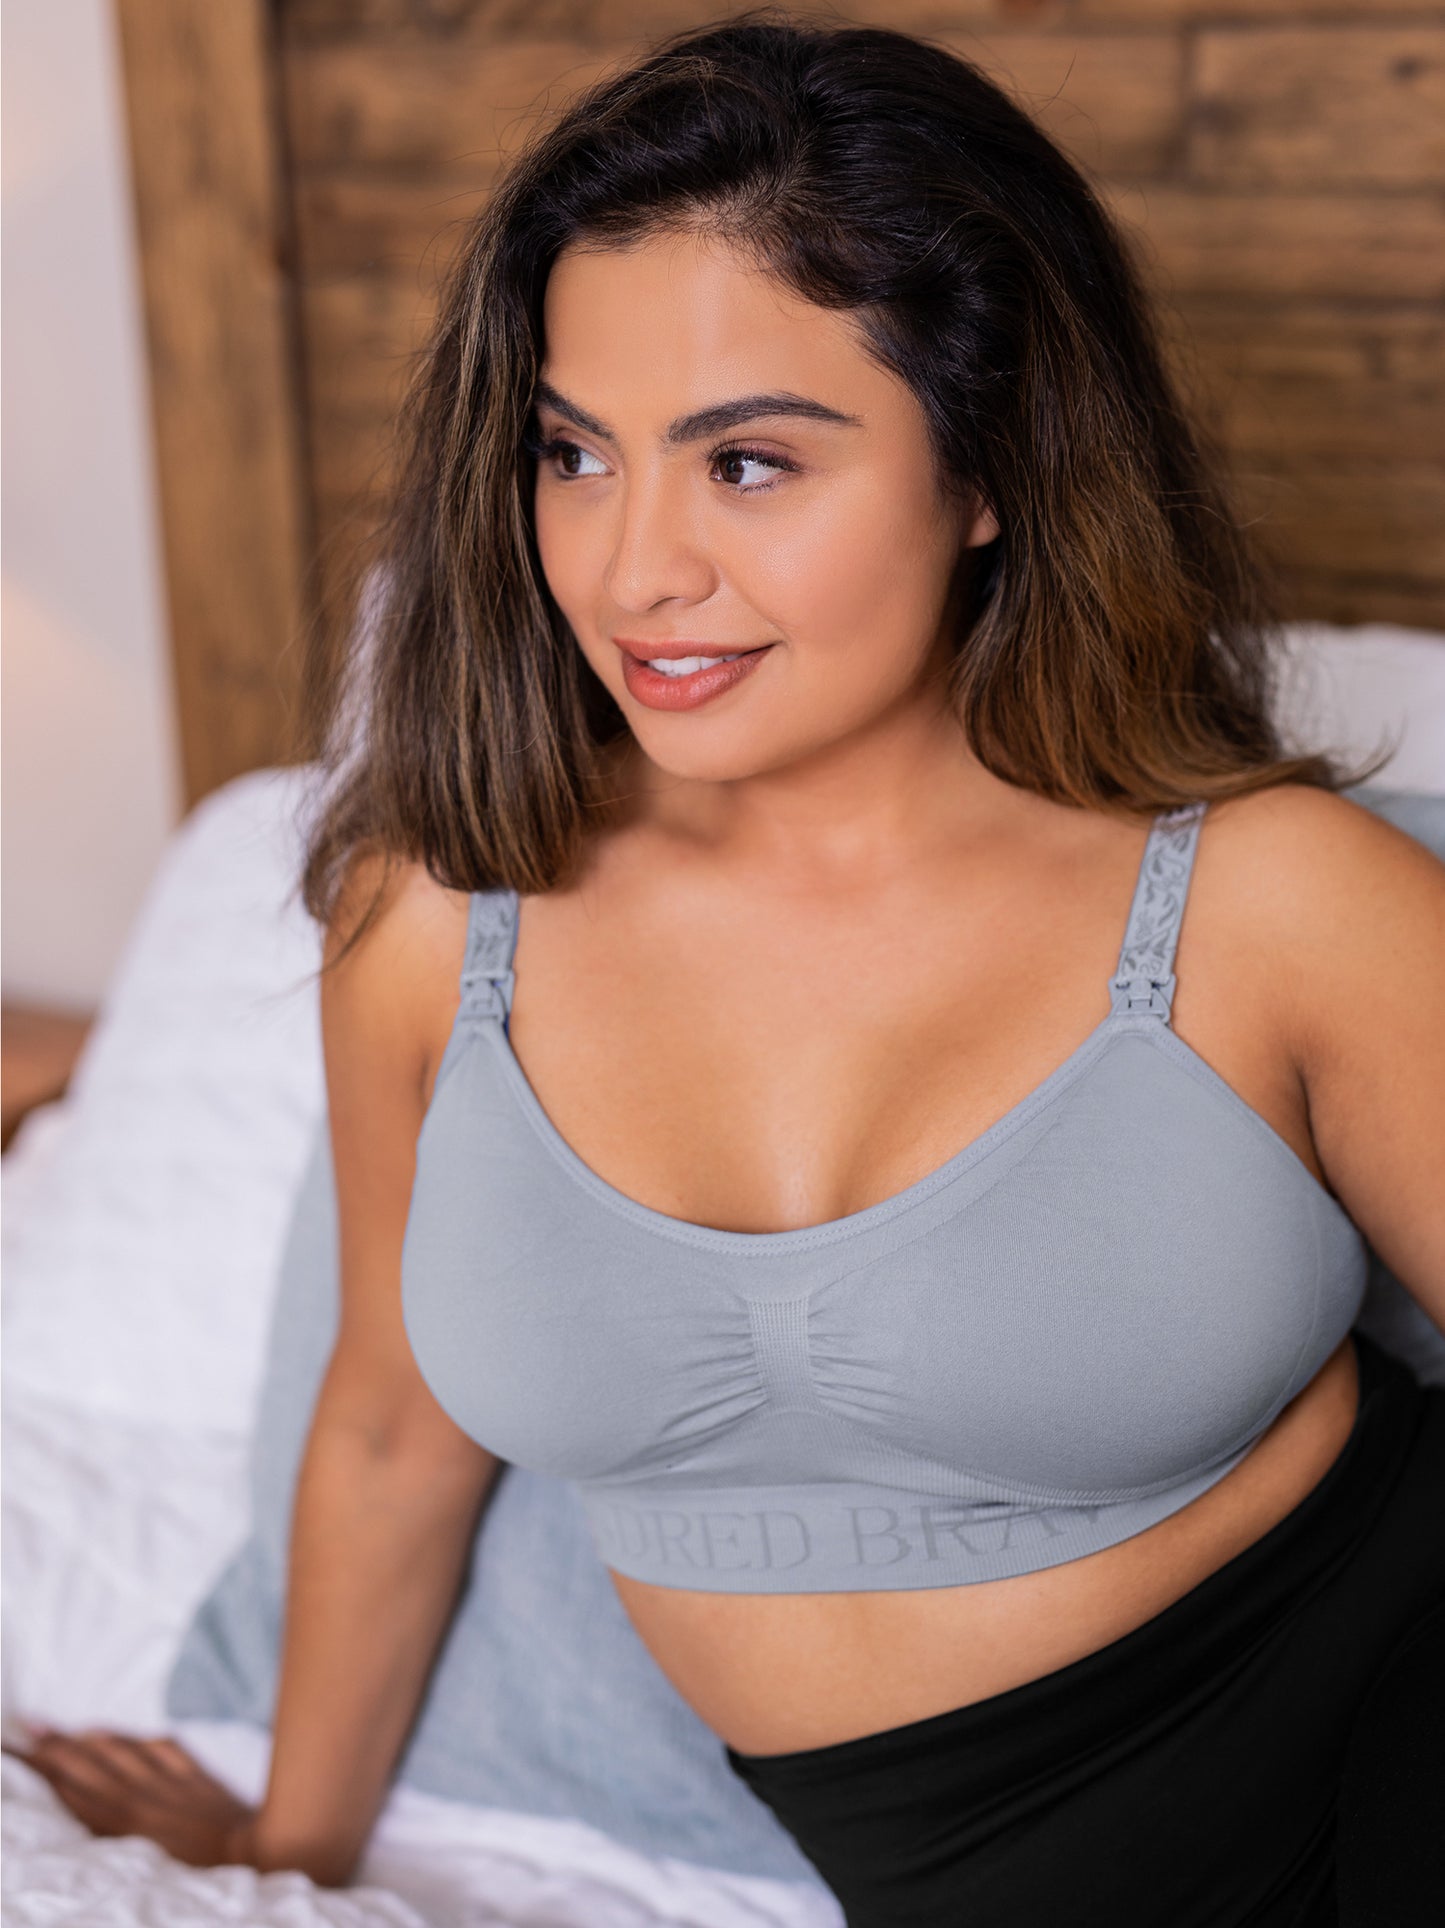 Model wearing the Simply Sublime® Nursing Bra in grey against a bed